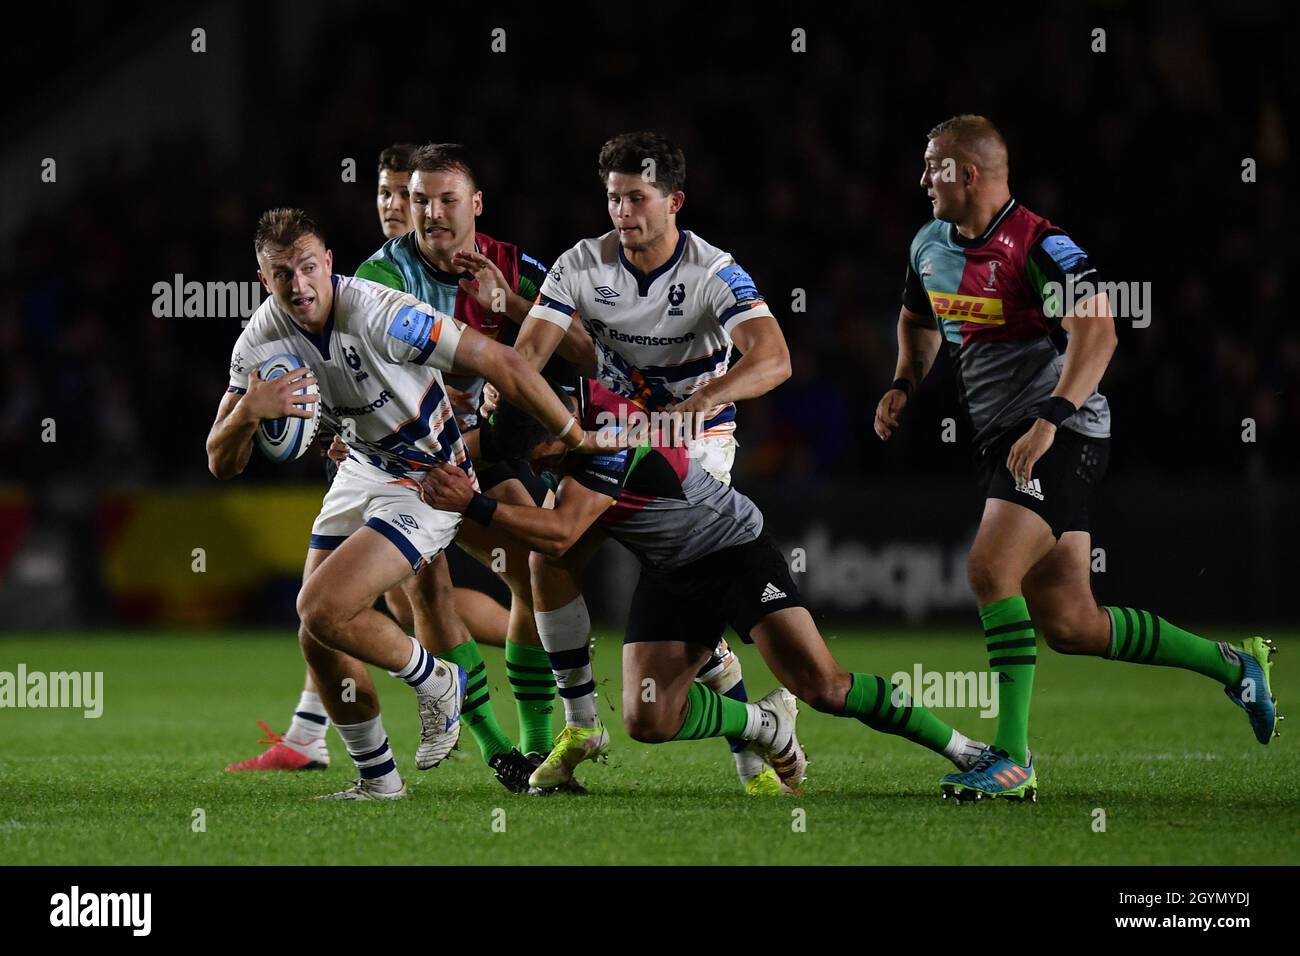 Twickenham Stoop Stadium, UK, UK. 8th October, 2021. Bristol Bears' Sam Bedlow is tackled by Harlequins' Tommy Allan during the Gallagher English Premiership game between Harlequins and Bristol Bears: Credit: Ashley Western/Alamy Live News Stock Photo